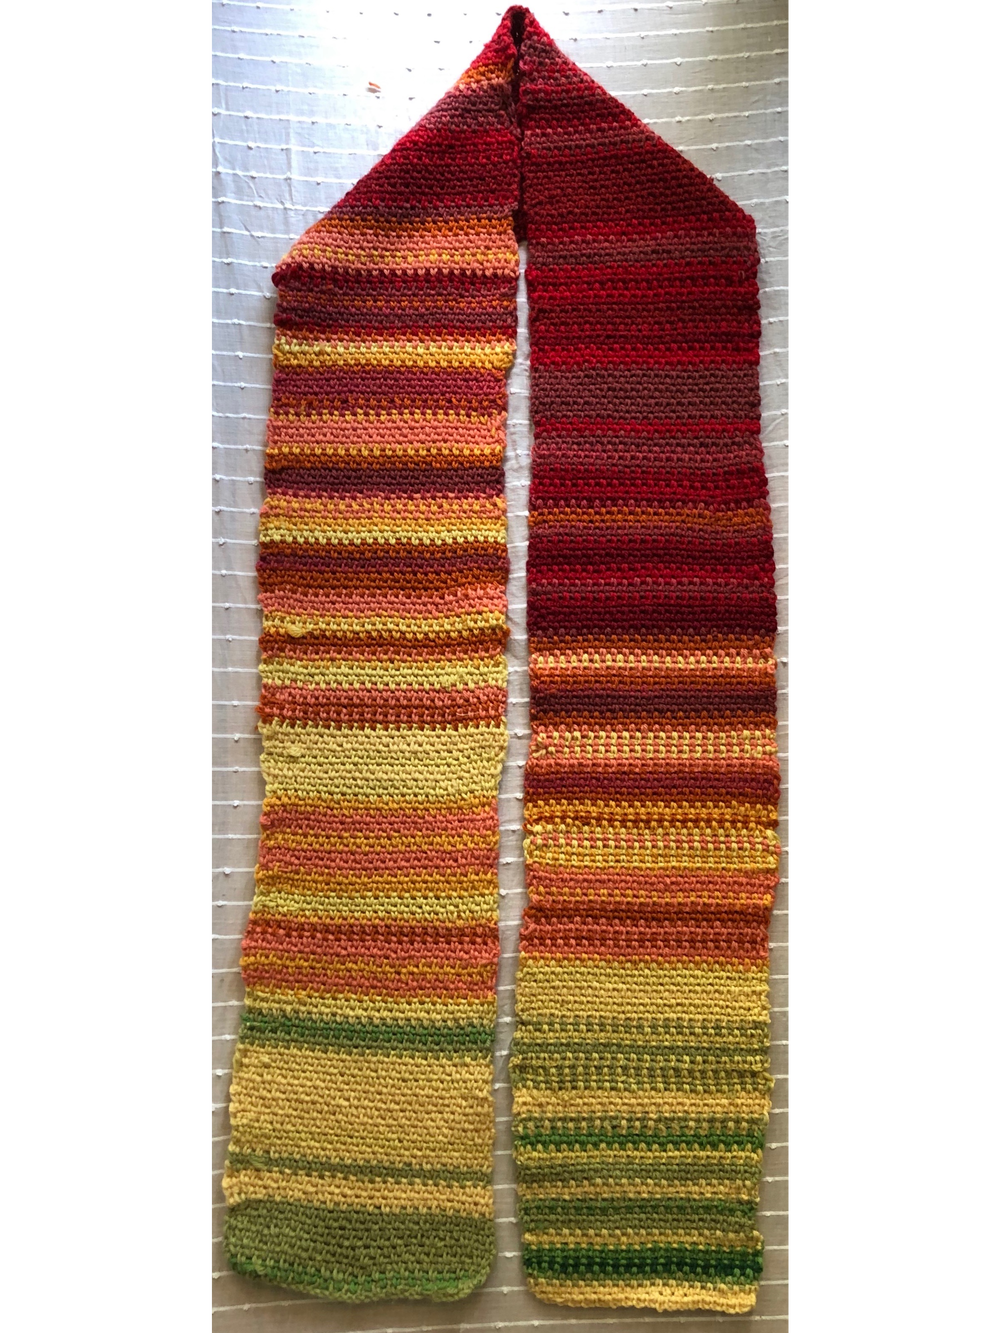 Scarf representing the daily temperatures of Davis in 2016